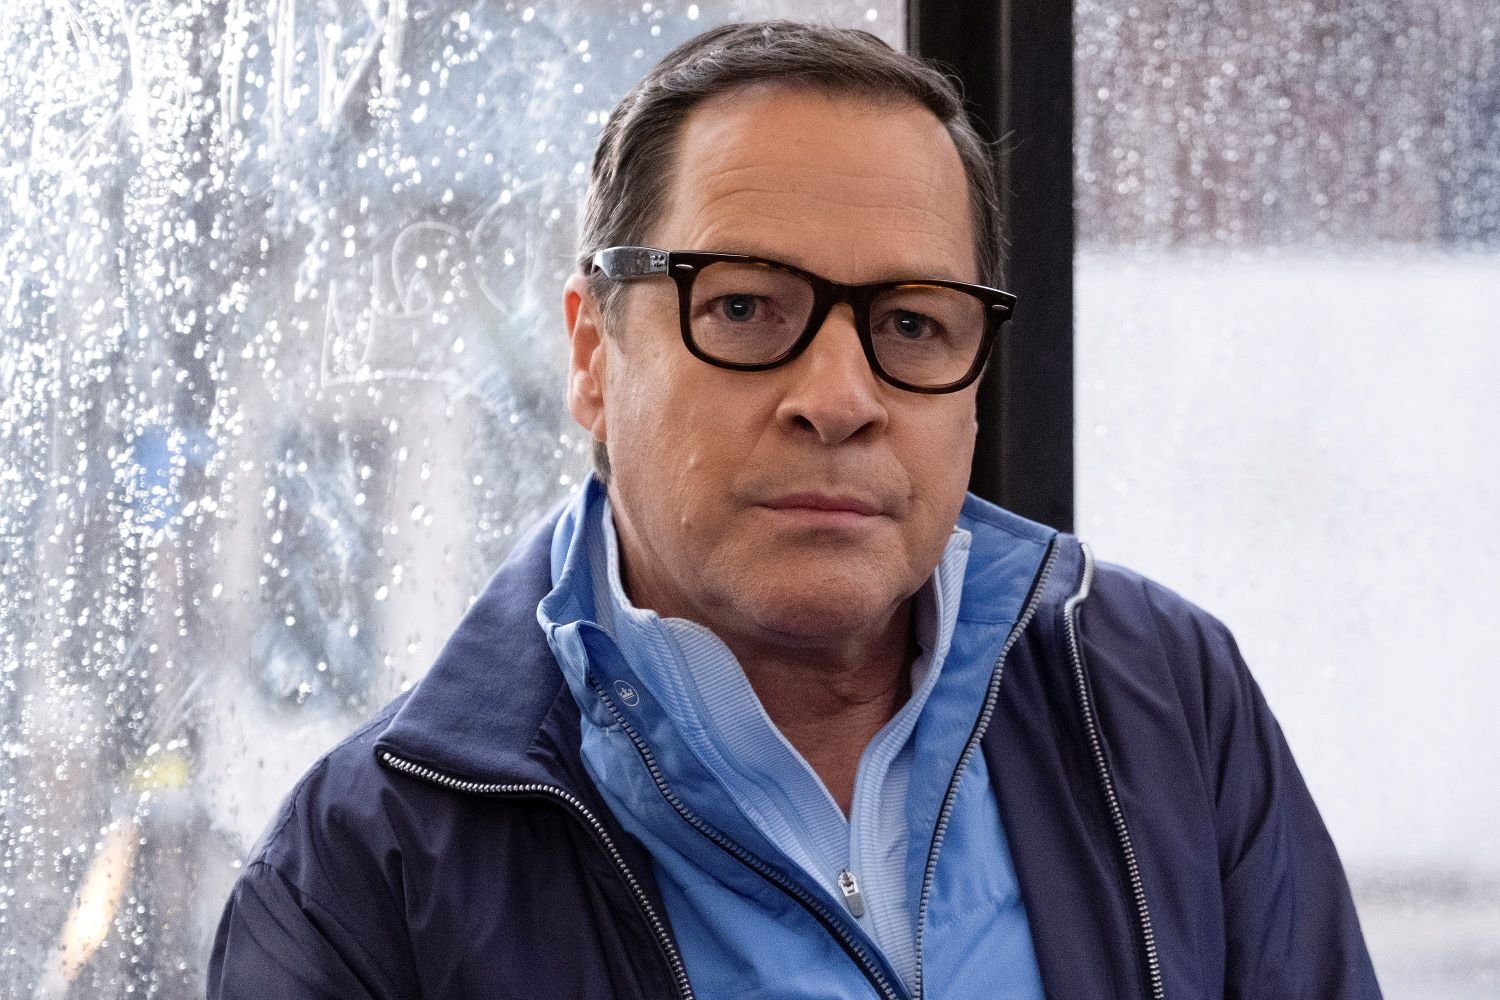 French Stewart, in character as Lenny Broussard in 'Will Trent' Season 1 Episode 10, wears a dark blue coat over a light blue zip-up jacket and black-framed glasses.